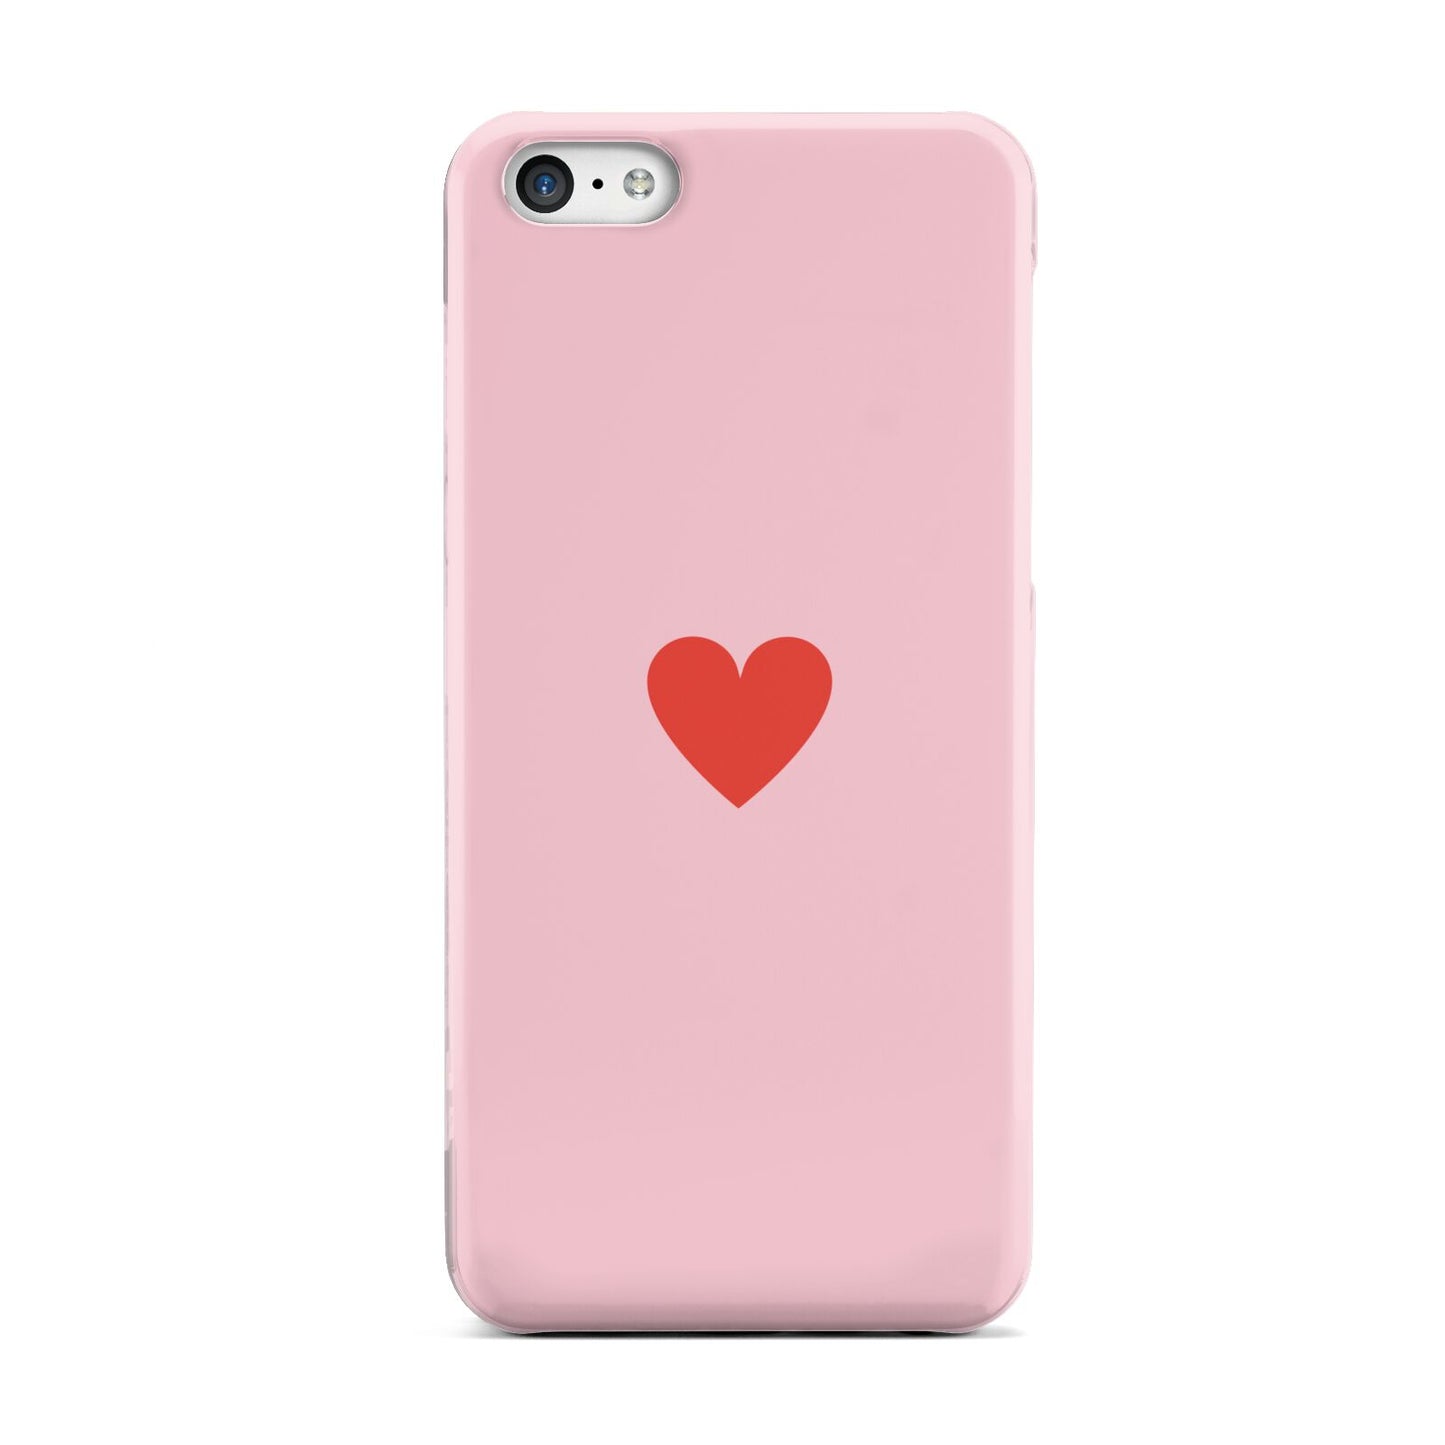 Red Heart Apple iPhone 5c Case